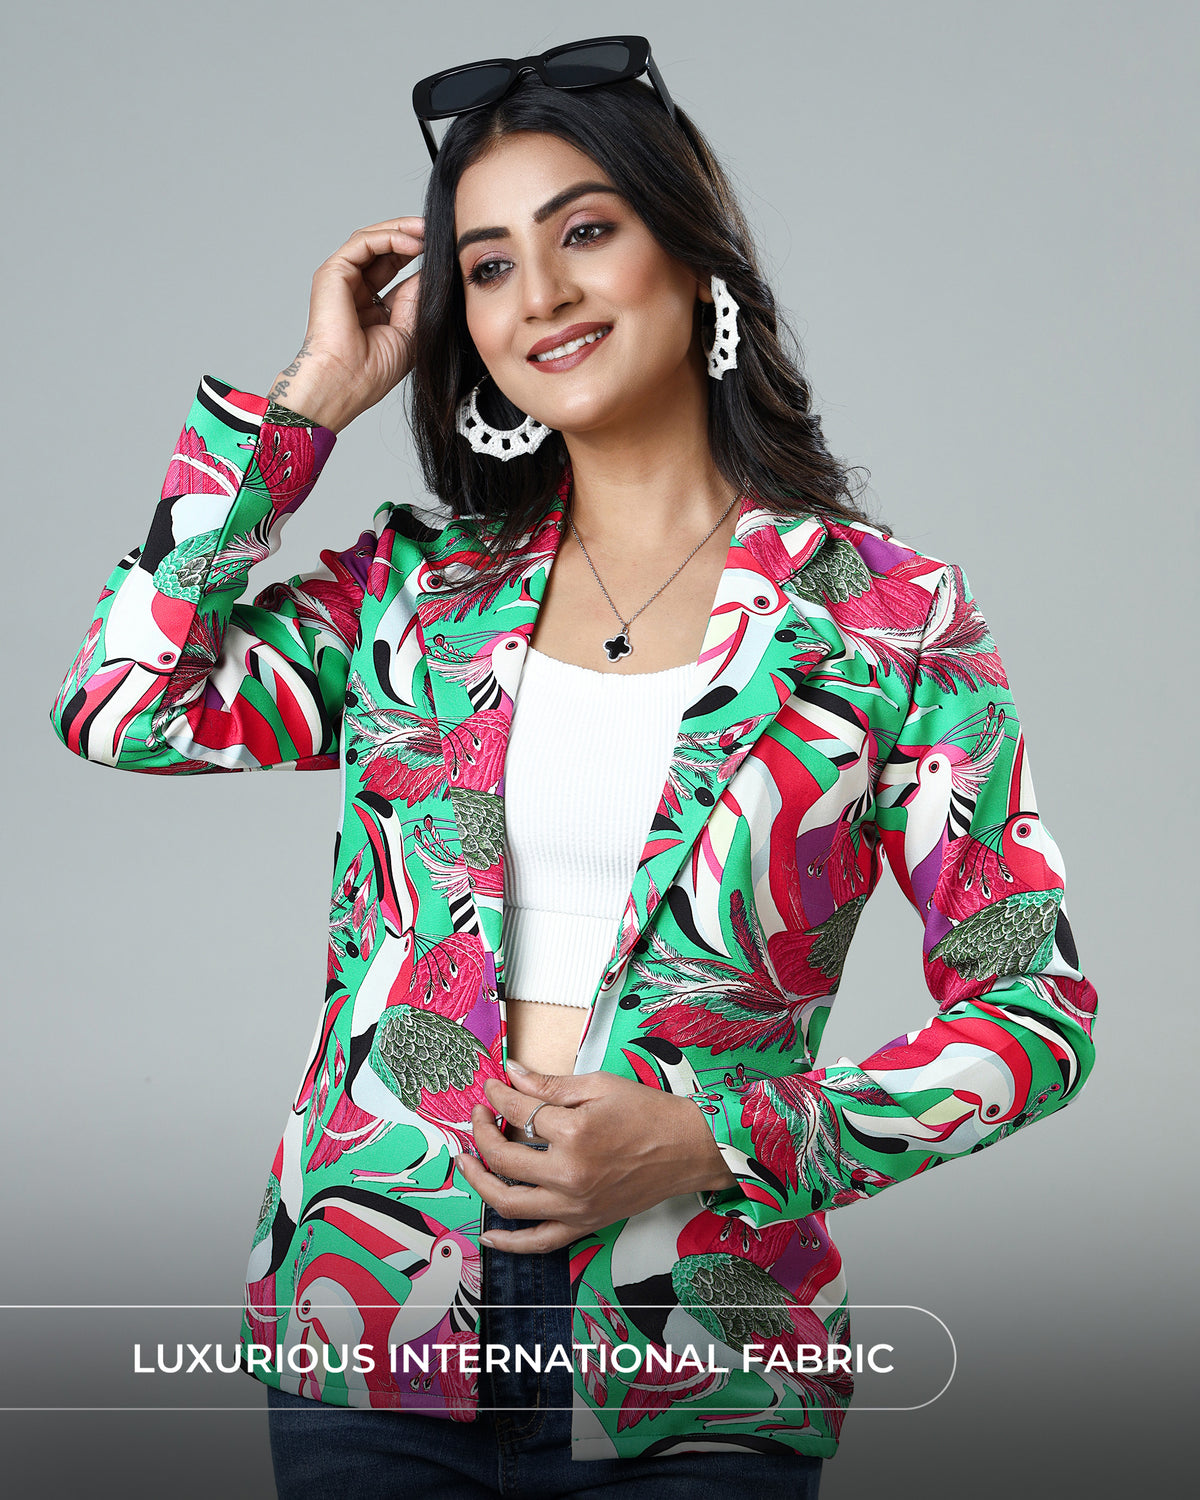 Funky And Fierce: The Bird Print Jacket for Women